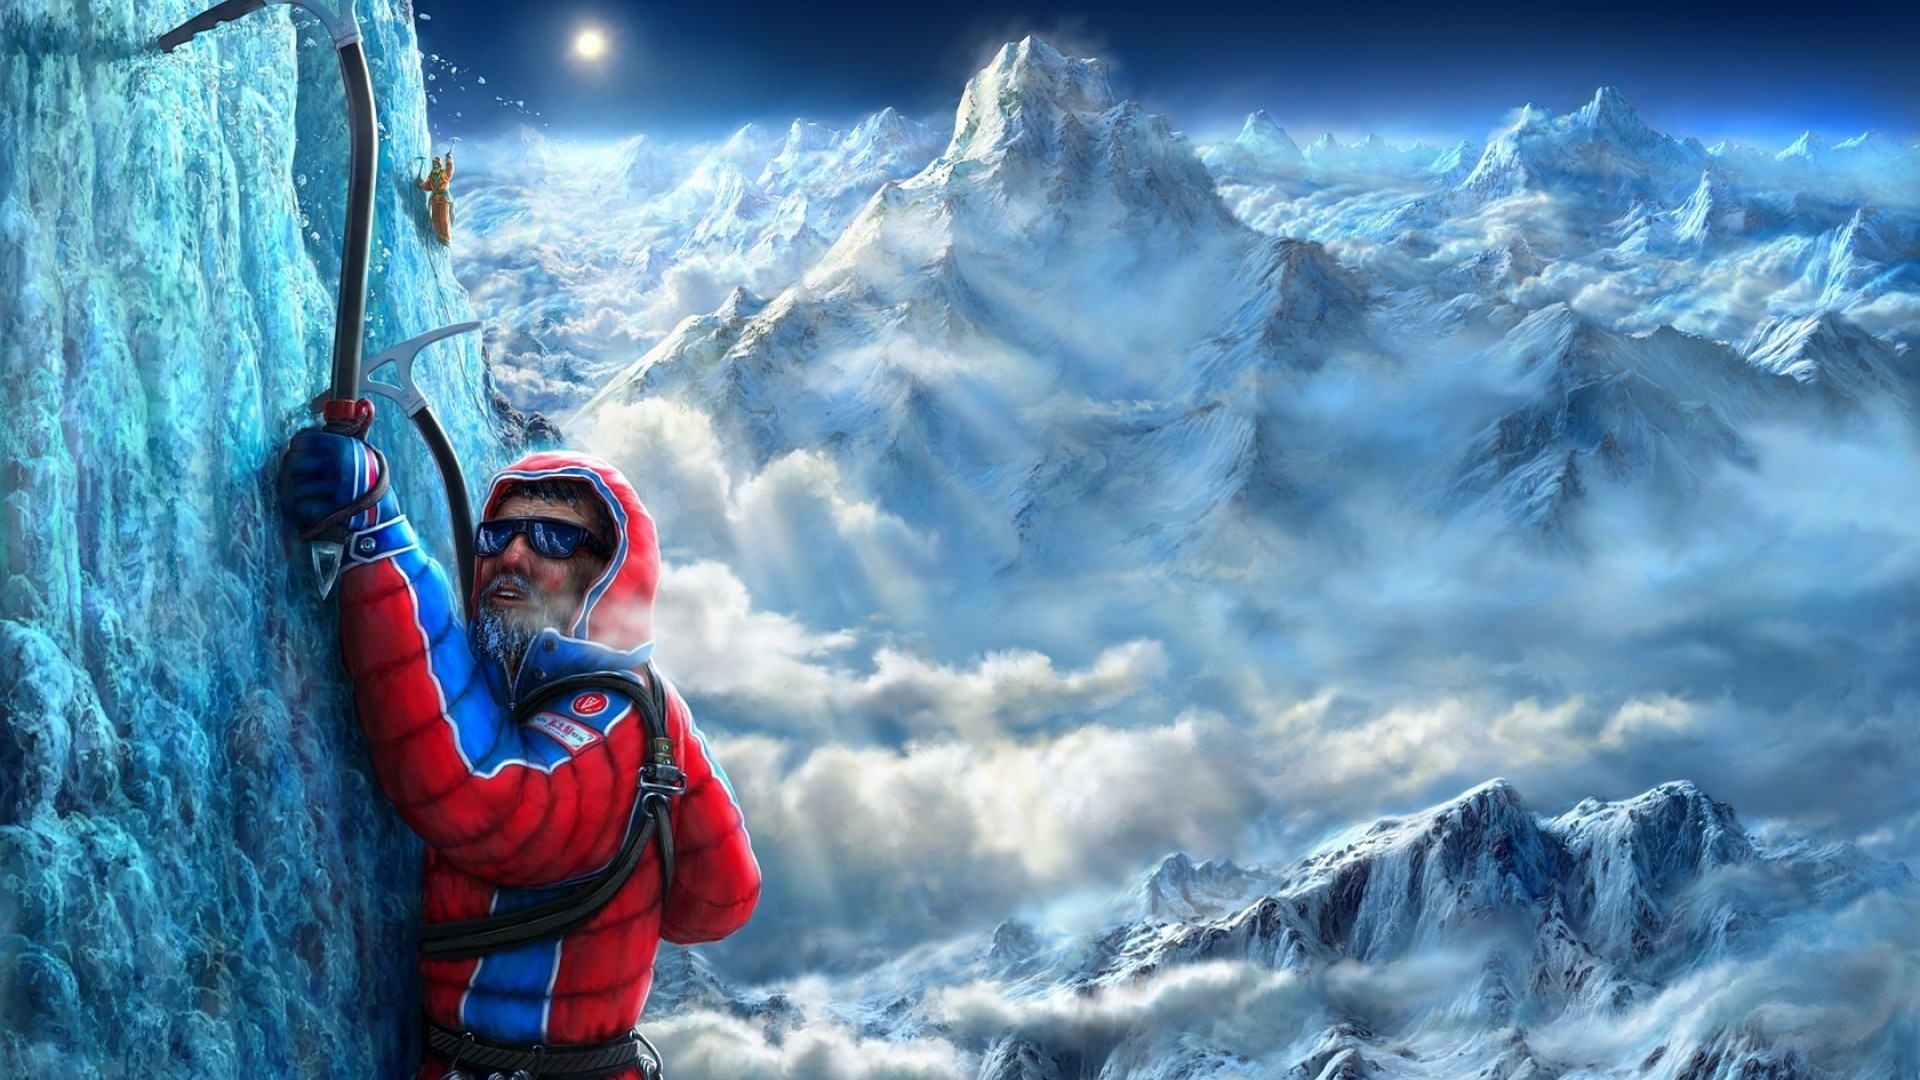 1920x1080 Ice Climbing HD Wallpapers THIS Wallpaper